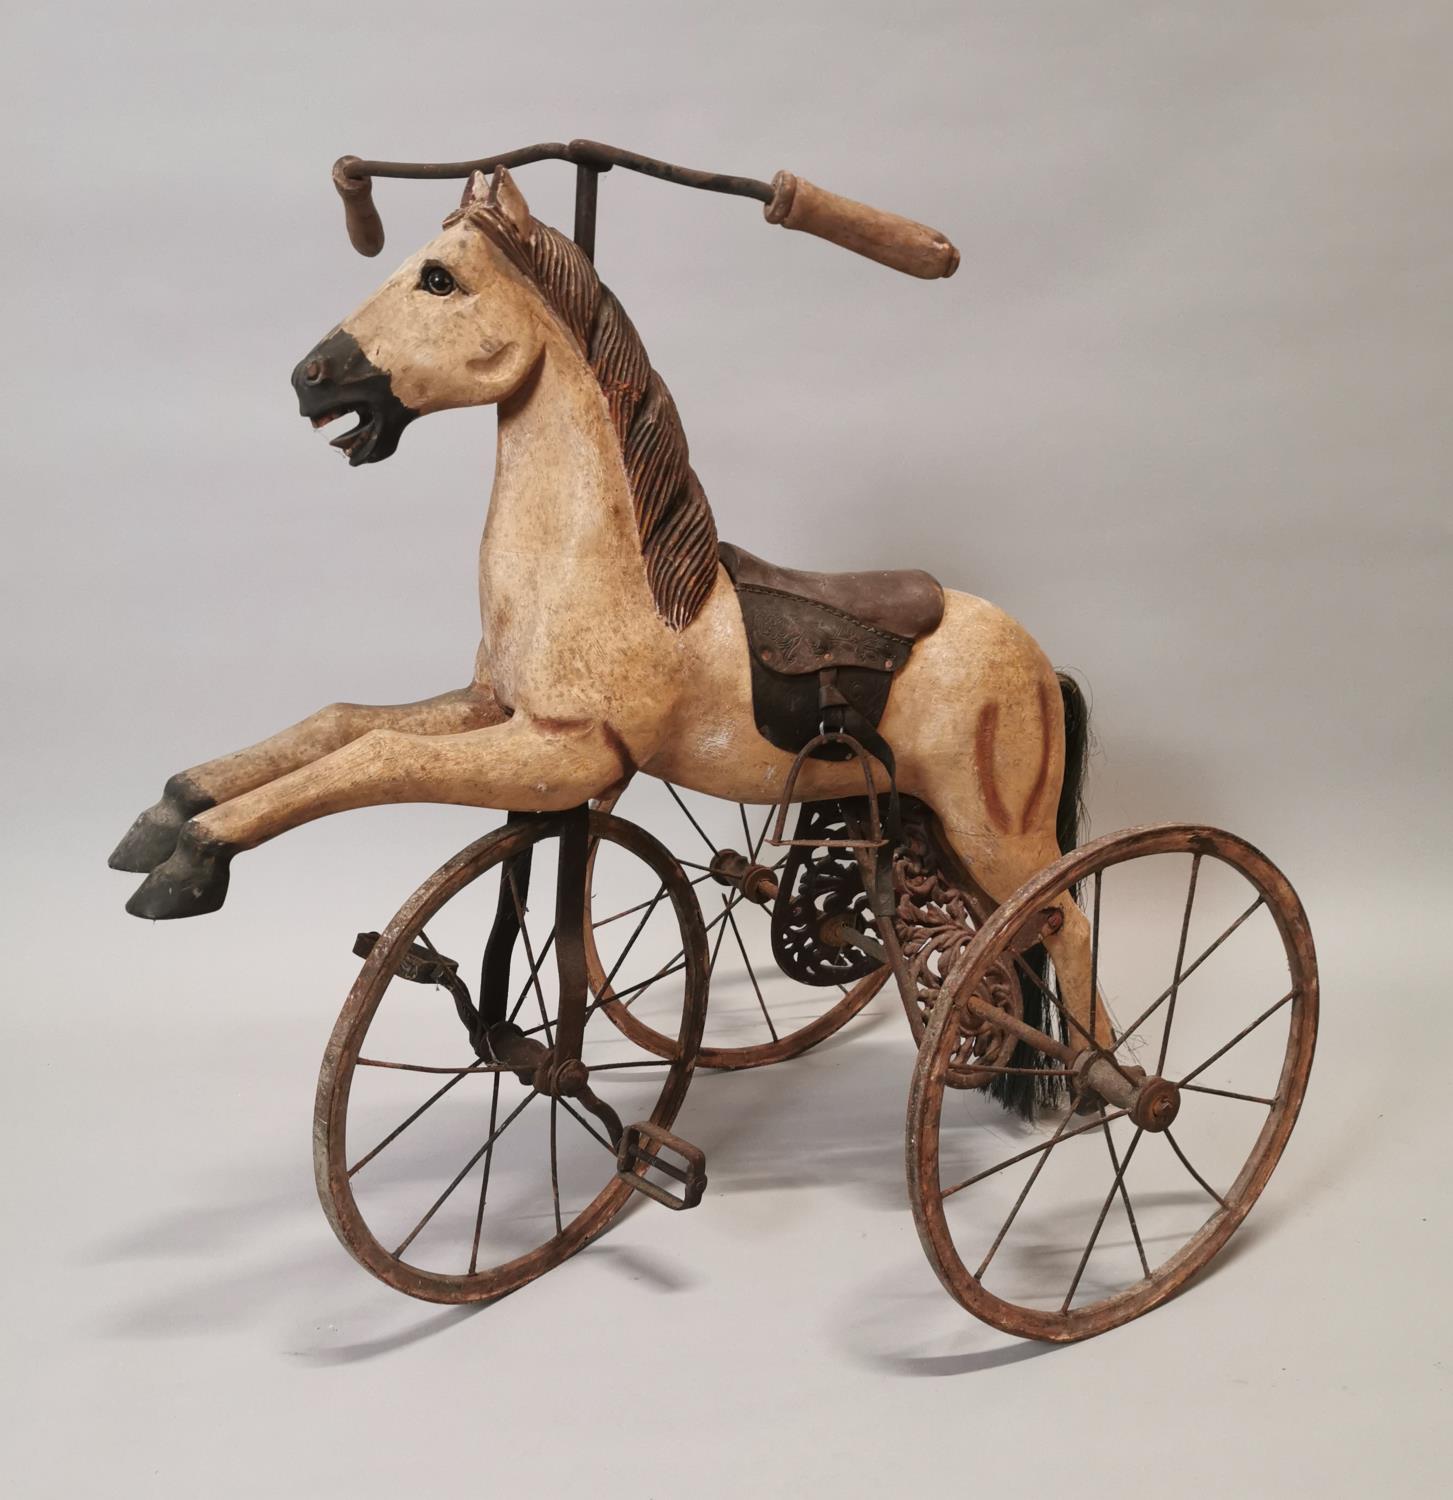 Early 20th C. Child's pedal horse.